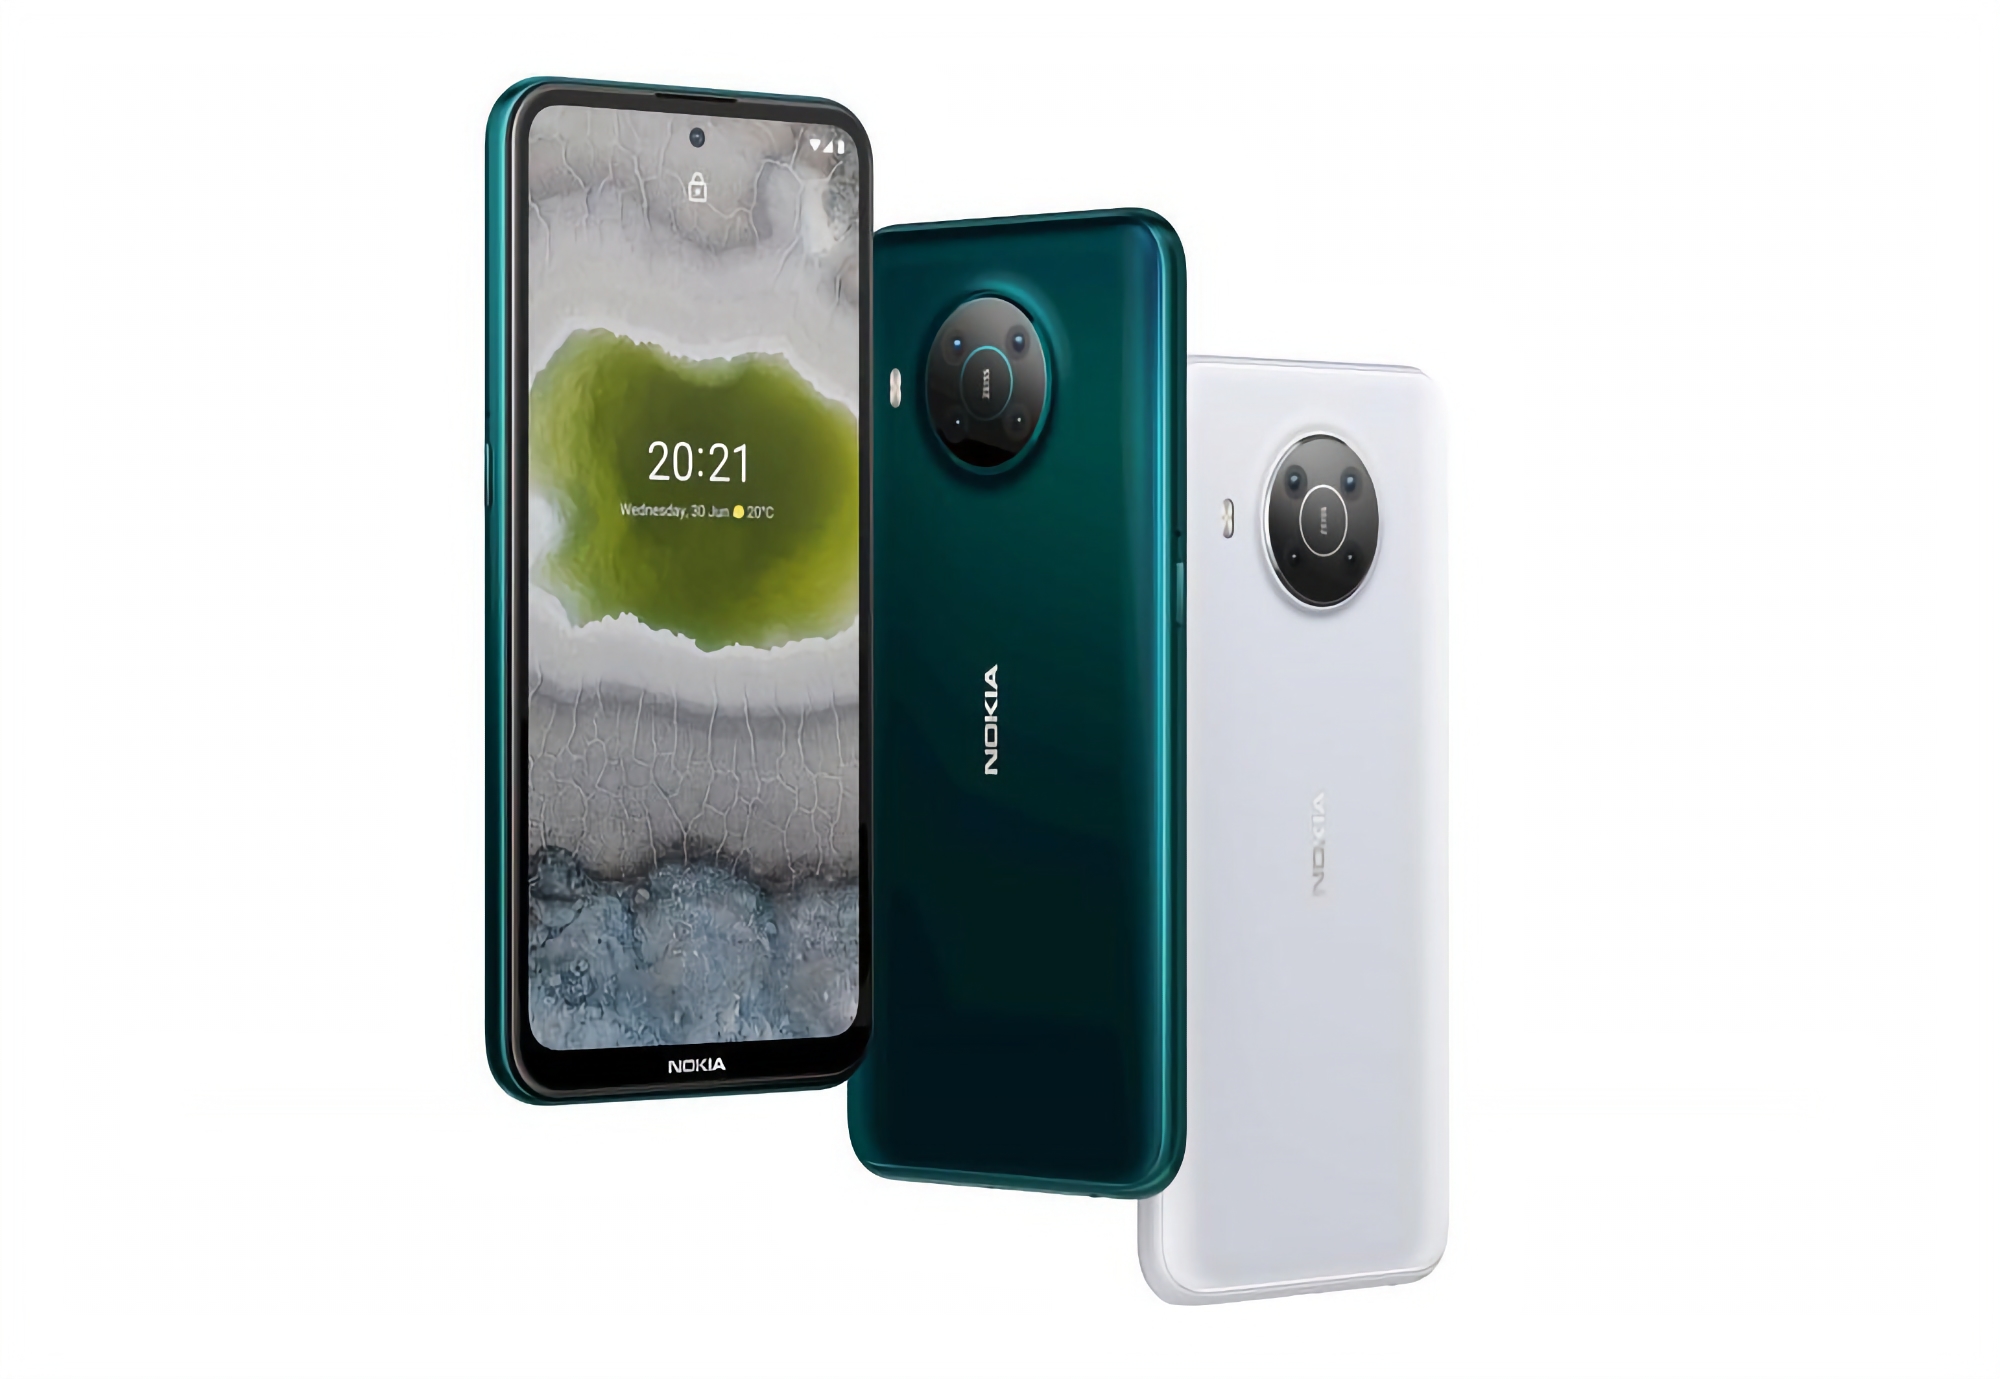 Nokia X10 on Amazon: 5G support, ZEISS camera and Snapdragon 480 processor for $40 off